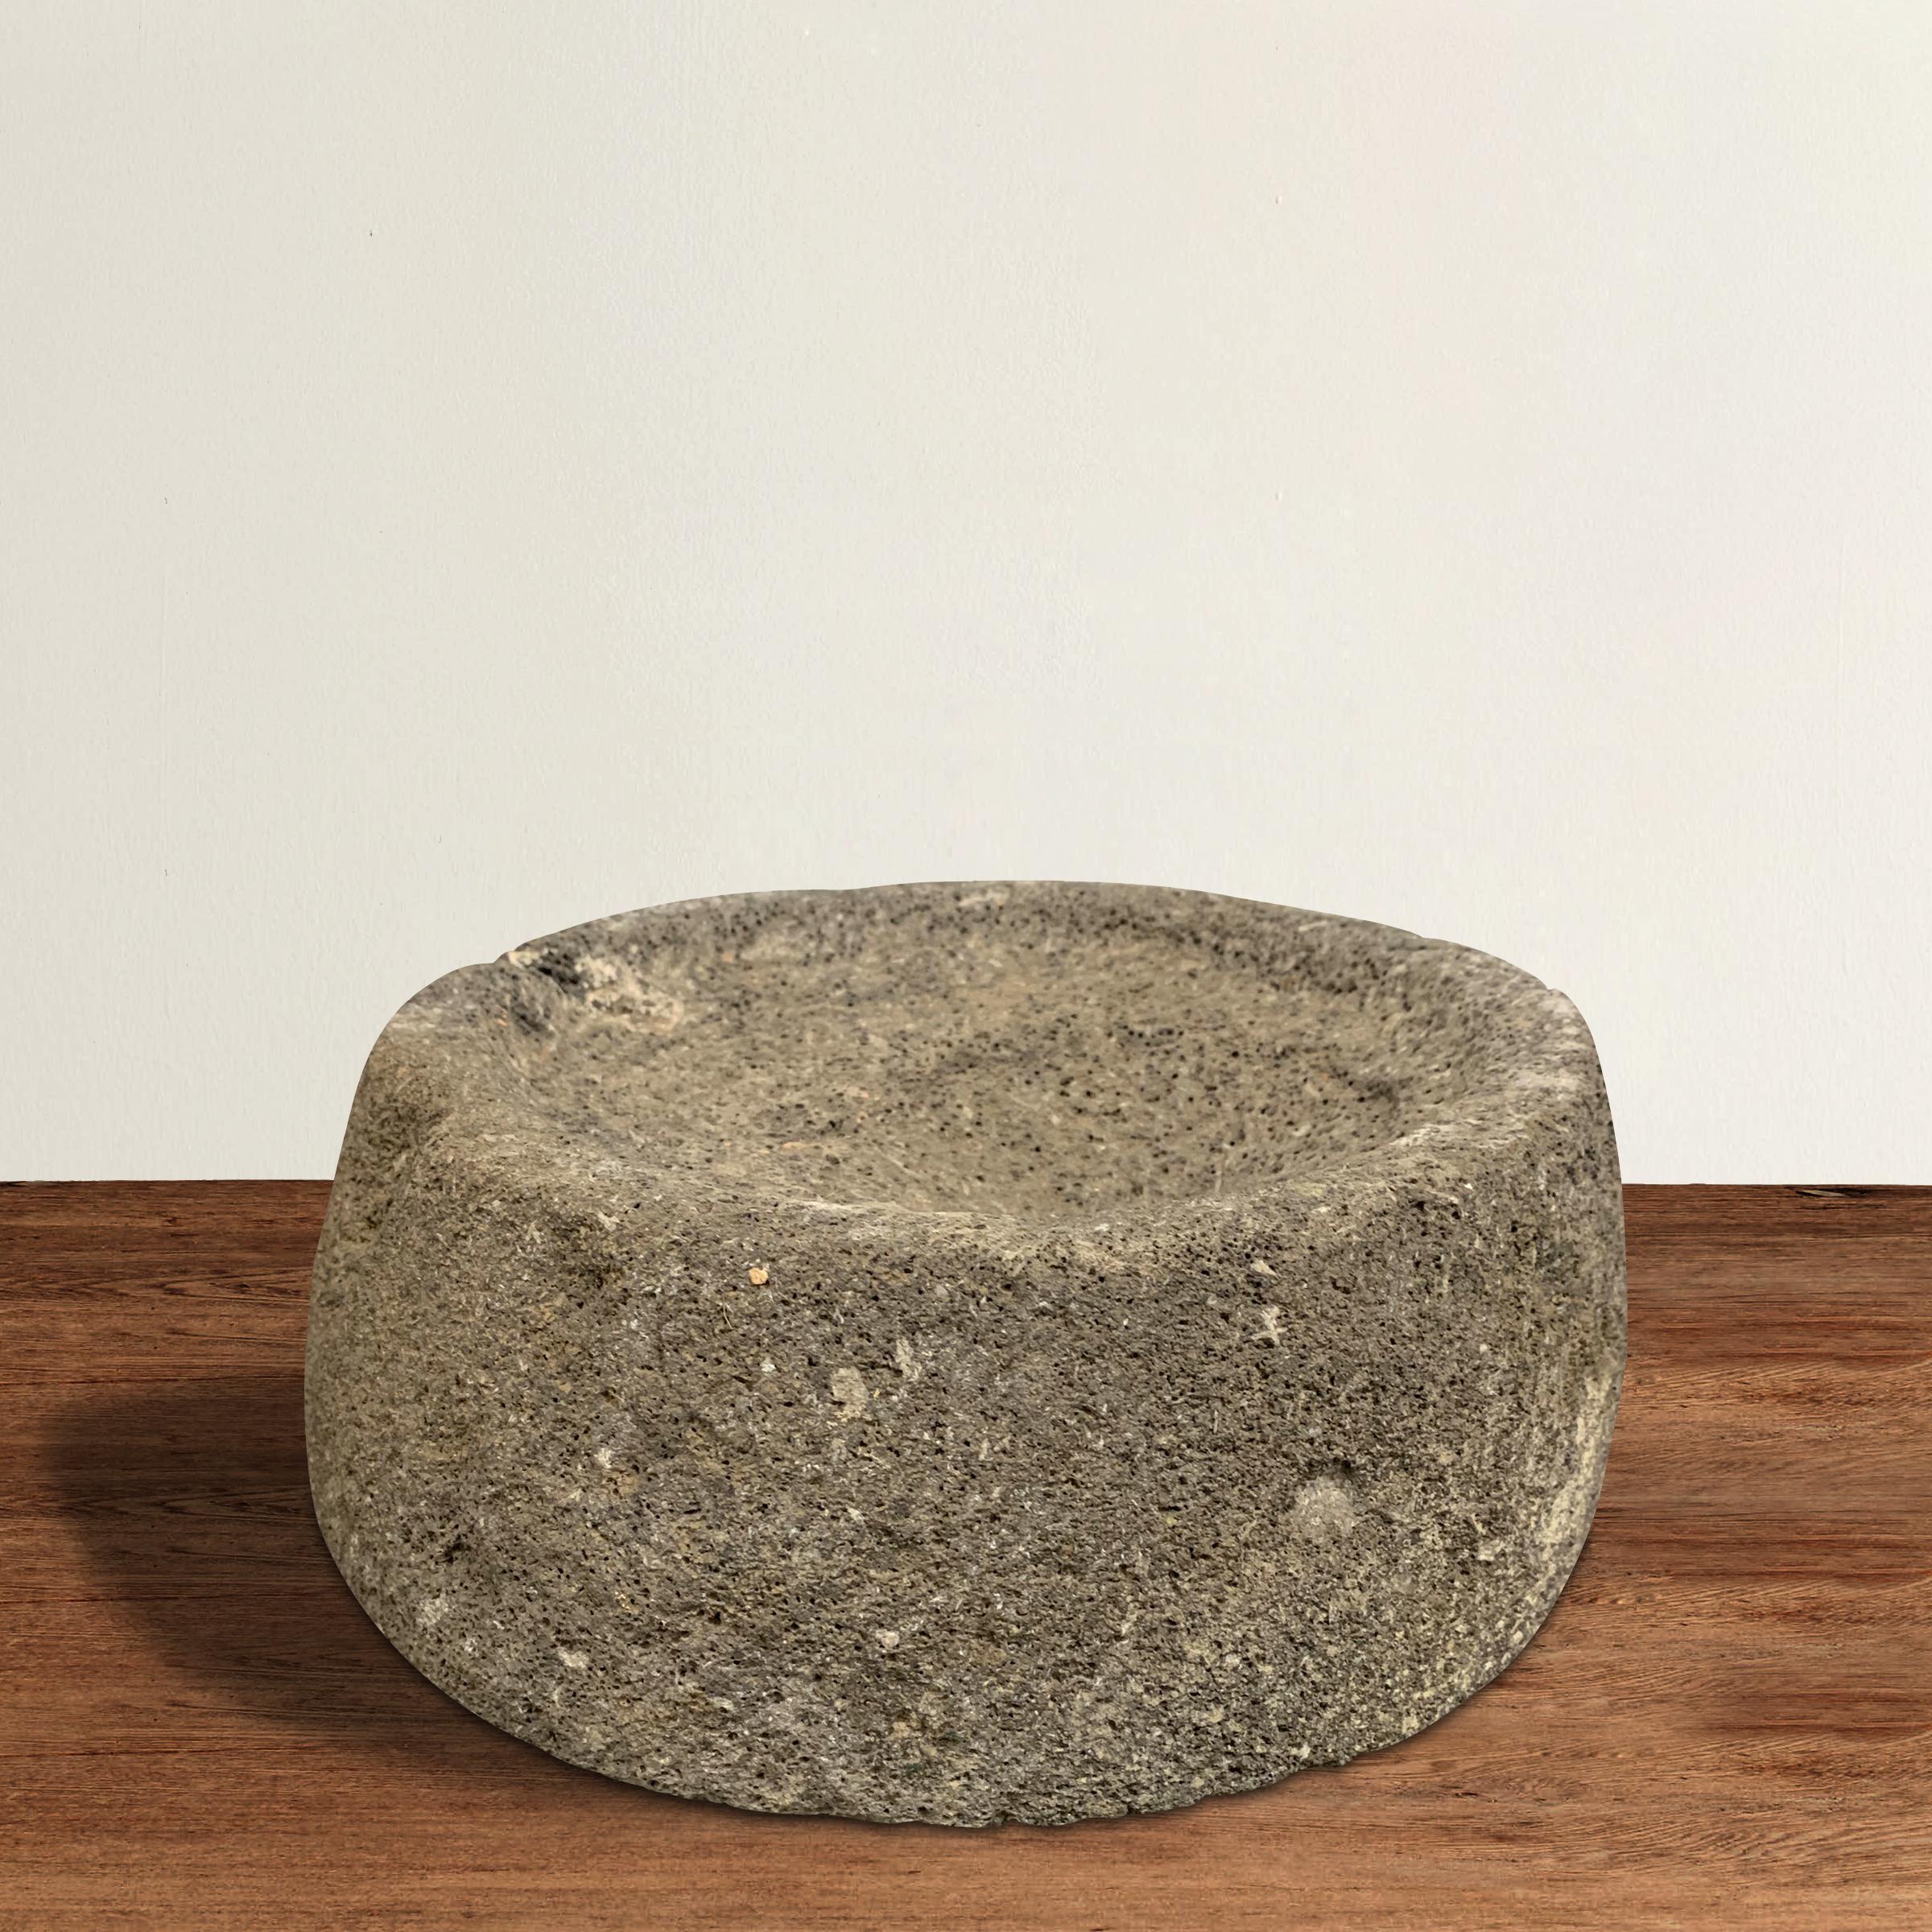 A wonderfully chic and primitive 19th century carved stone millstone with a convex surface that makes it perfect for use as a bowl in your kitchen, or as a catchall for your keys on a table in your entry.